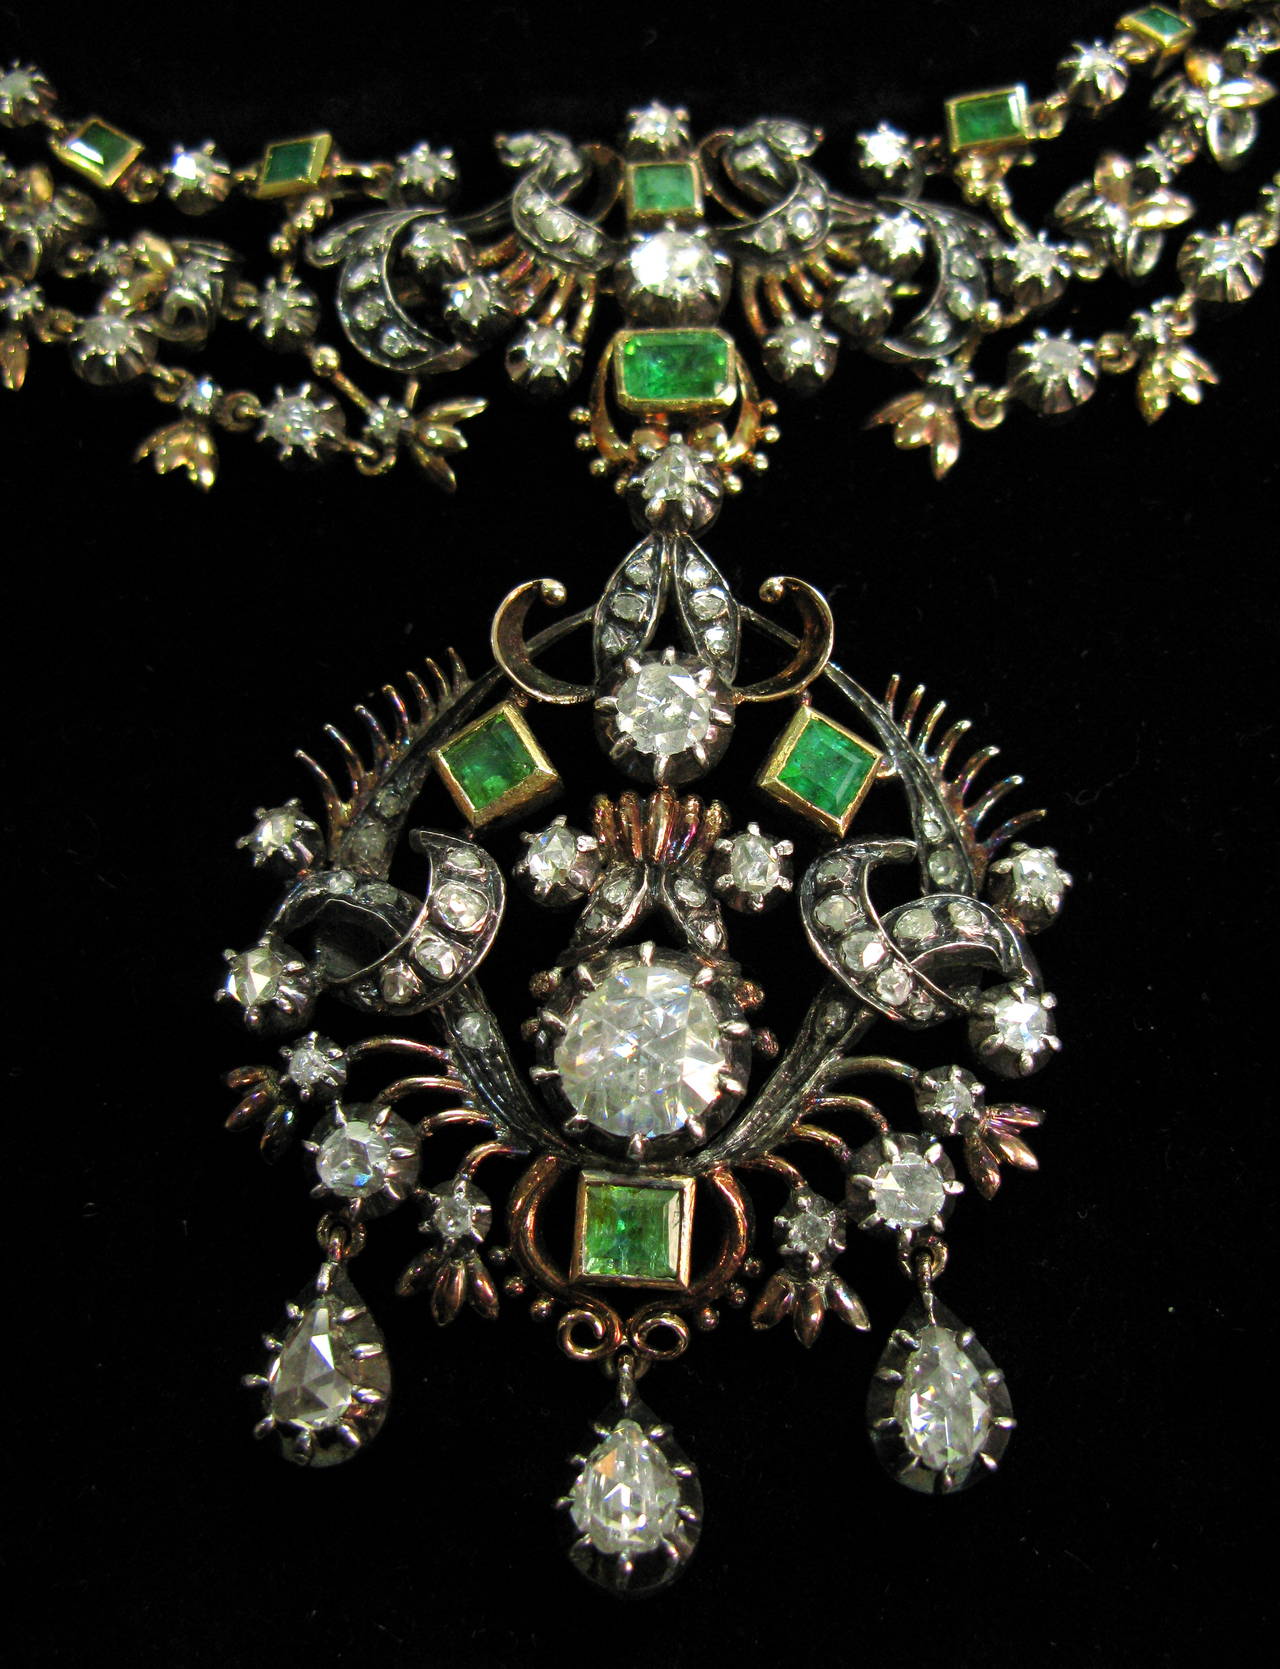 This magnificent piece of jewelry dates back to the 19th century when jewelry was handcrafted with incredibly labor-intensive processes where malleable metal was hammered into intricate designs and patterns. This necklace consists of ornately